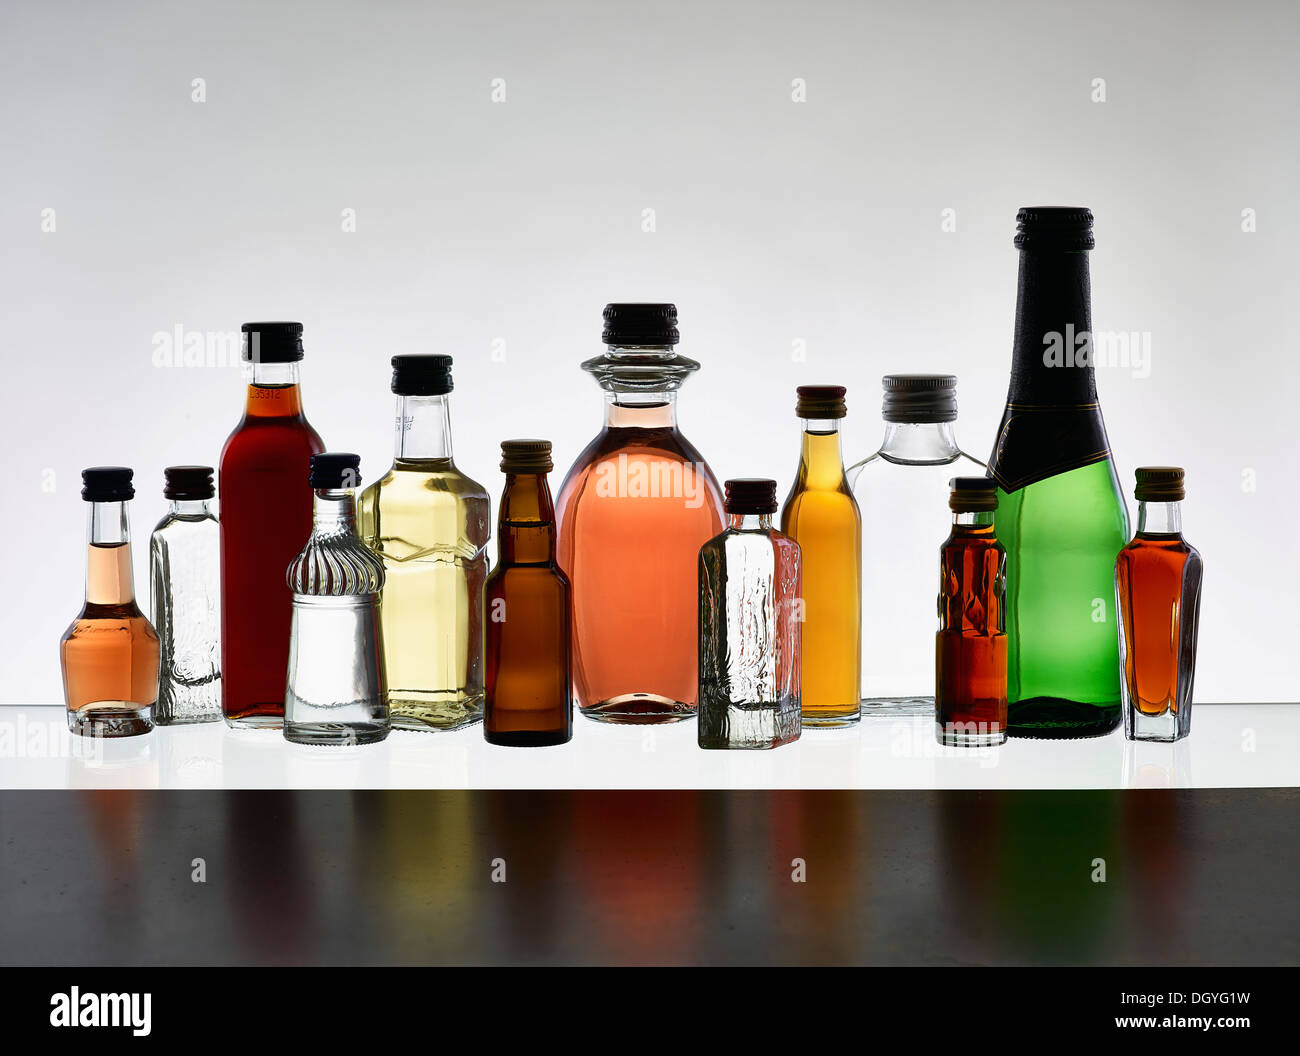 A grouping of various miniature bottles of alcohol without labels, back lit Stock Photo